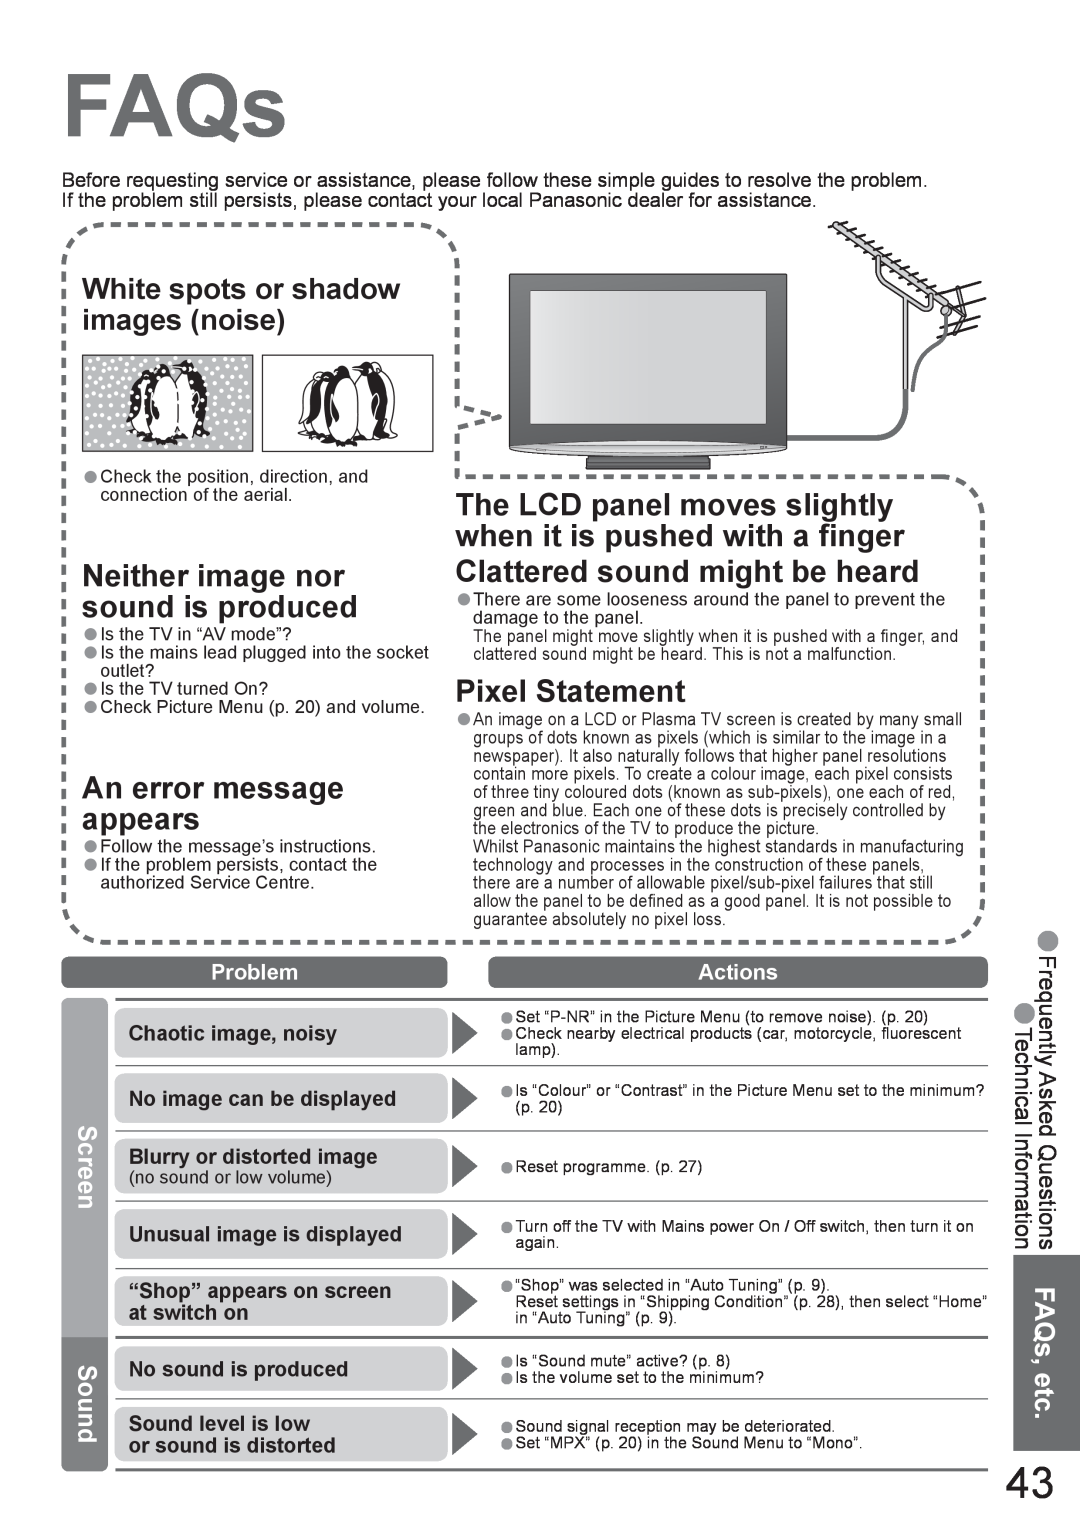 Panasonic TX-37LZD800A manual FAQs, White spots or shadow images noise, Sound, Problem, Actions, Blurry or distorted image 